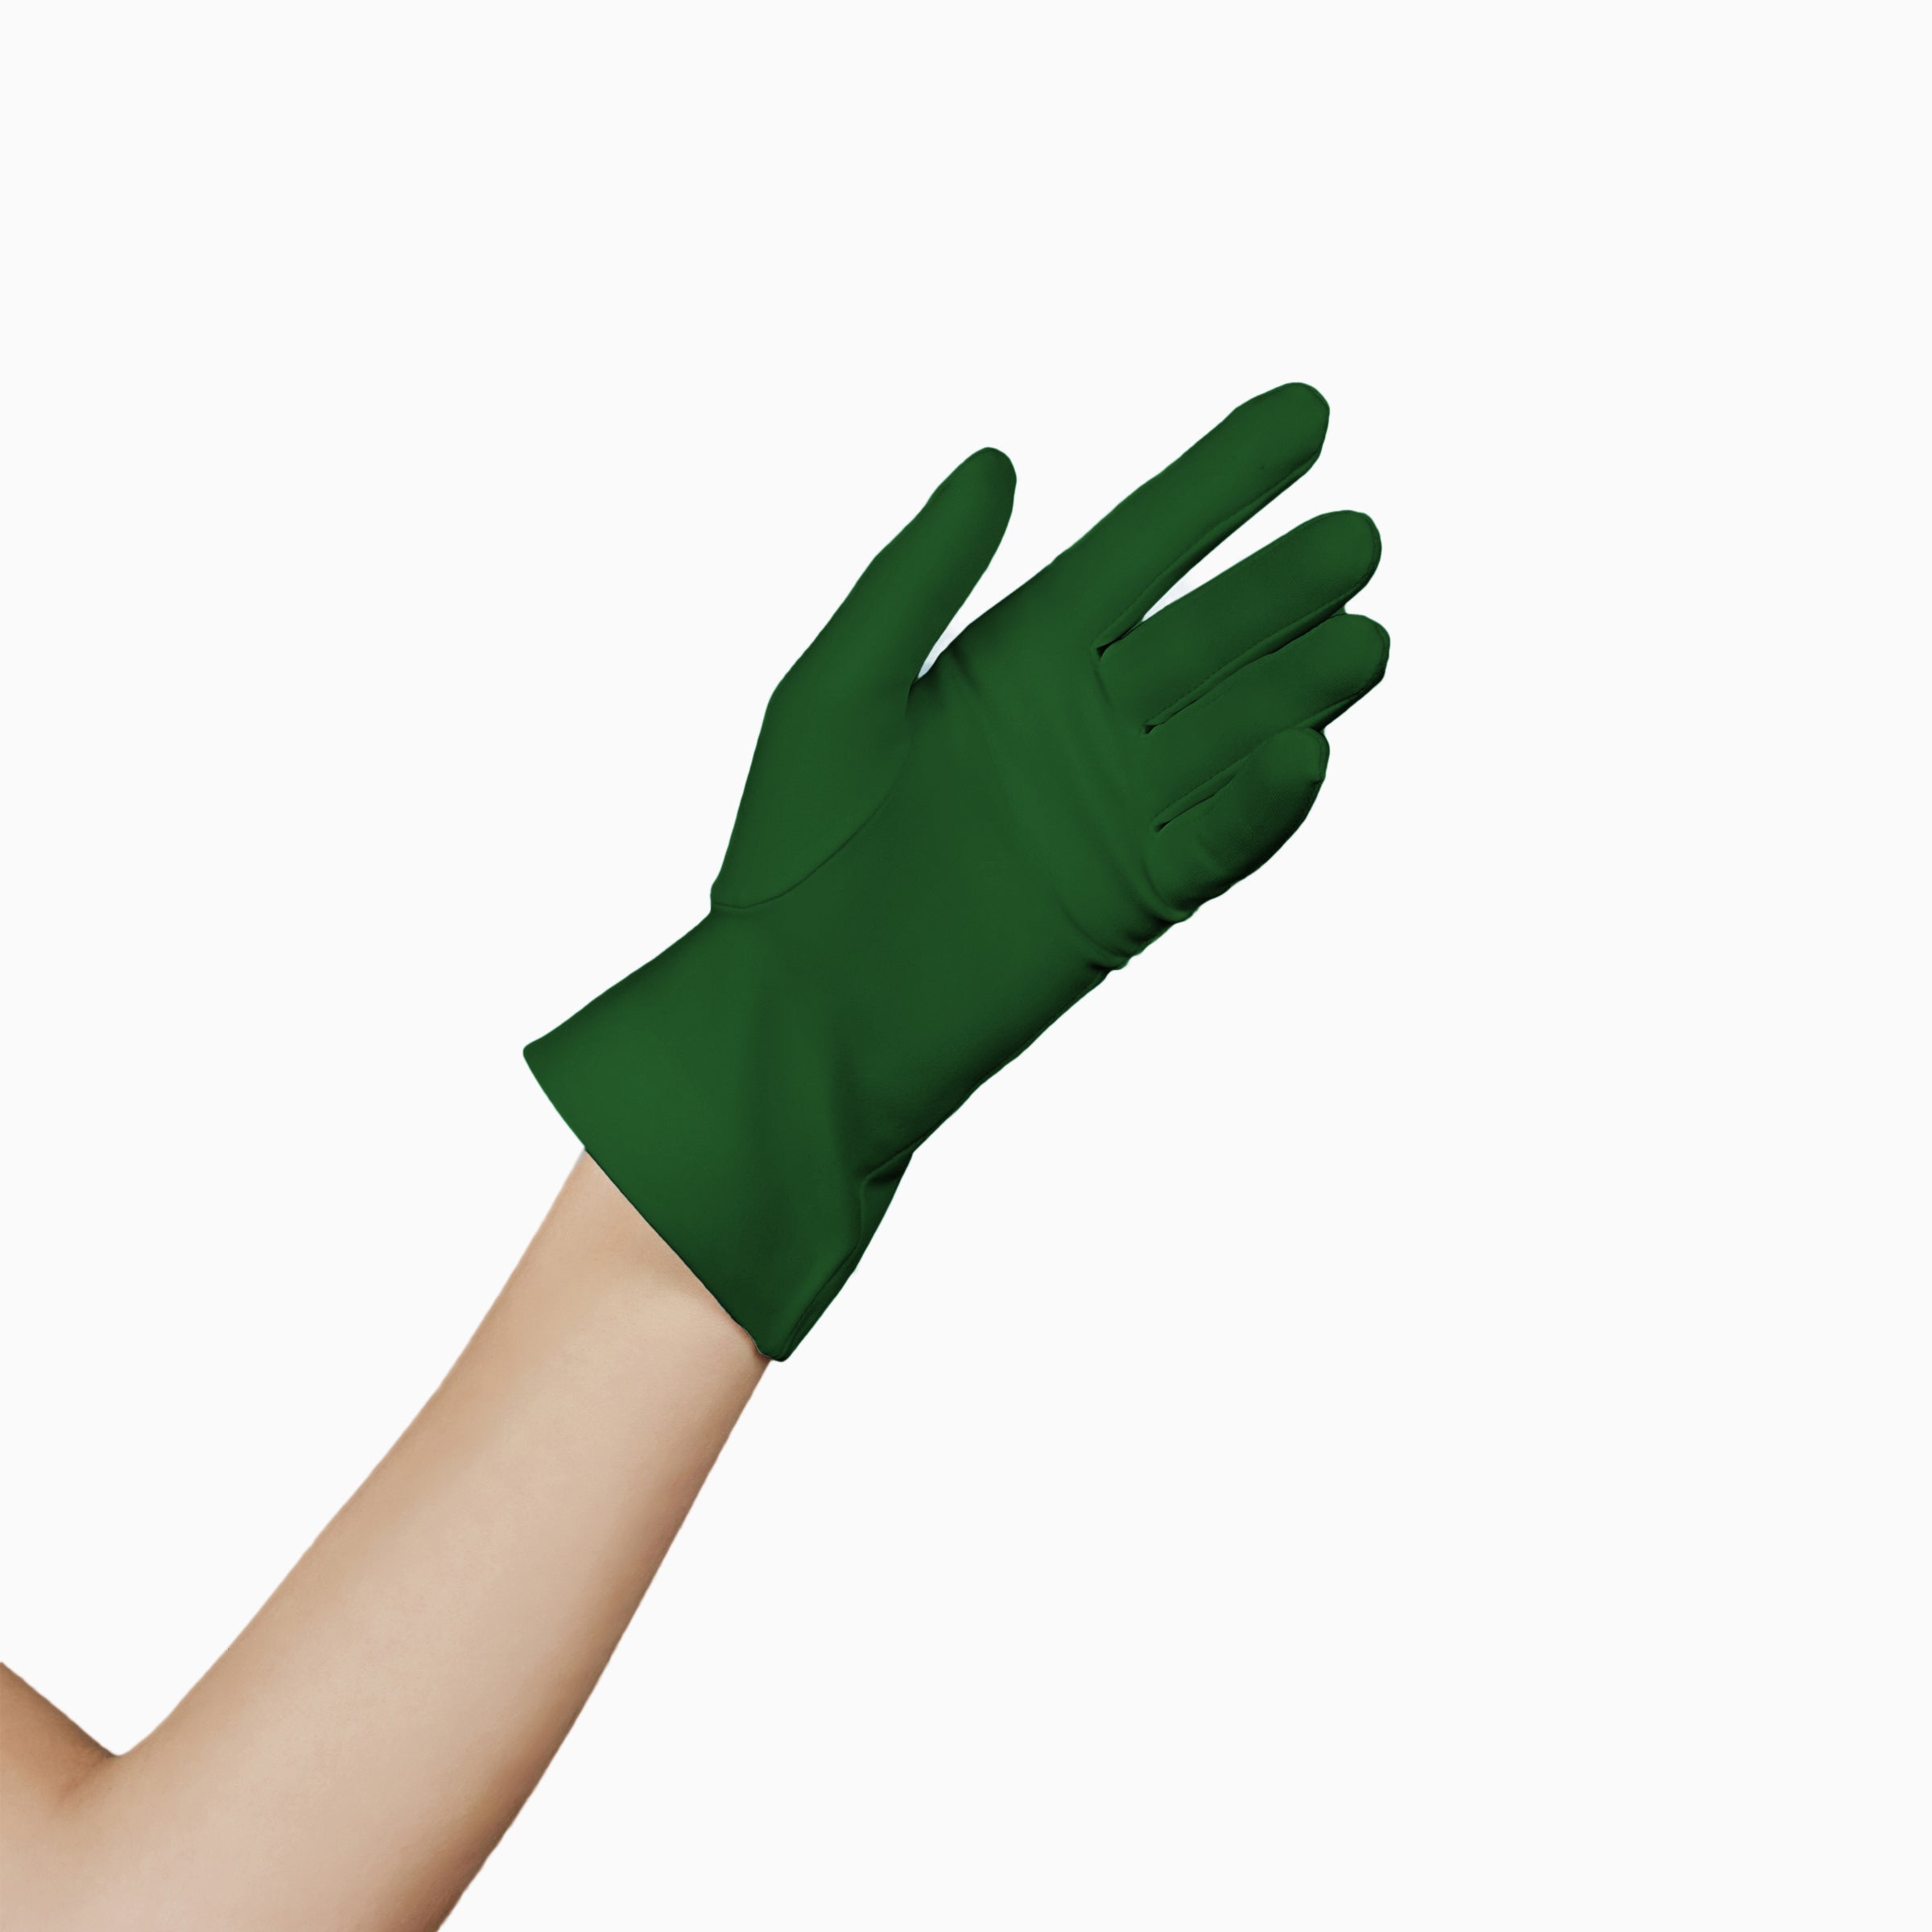 A woman adding a touch of holiday cheer with her LadyFinch - The Isabelle - Green Day Glove - Holiday Edition equipped with touchscreen index fingers.